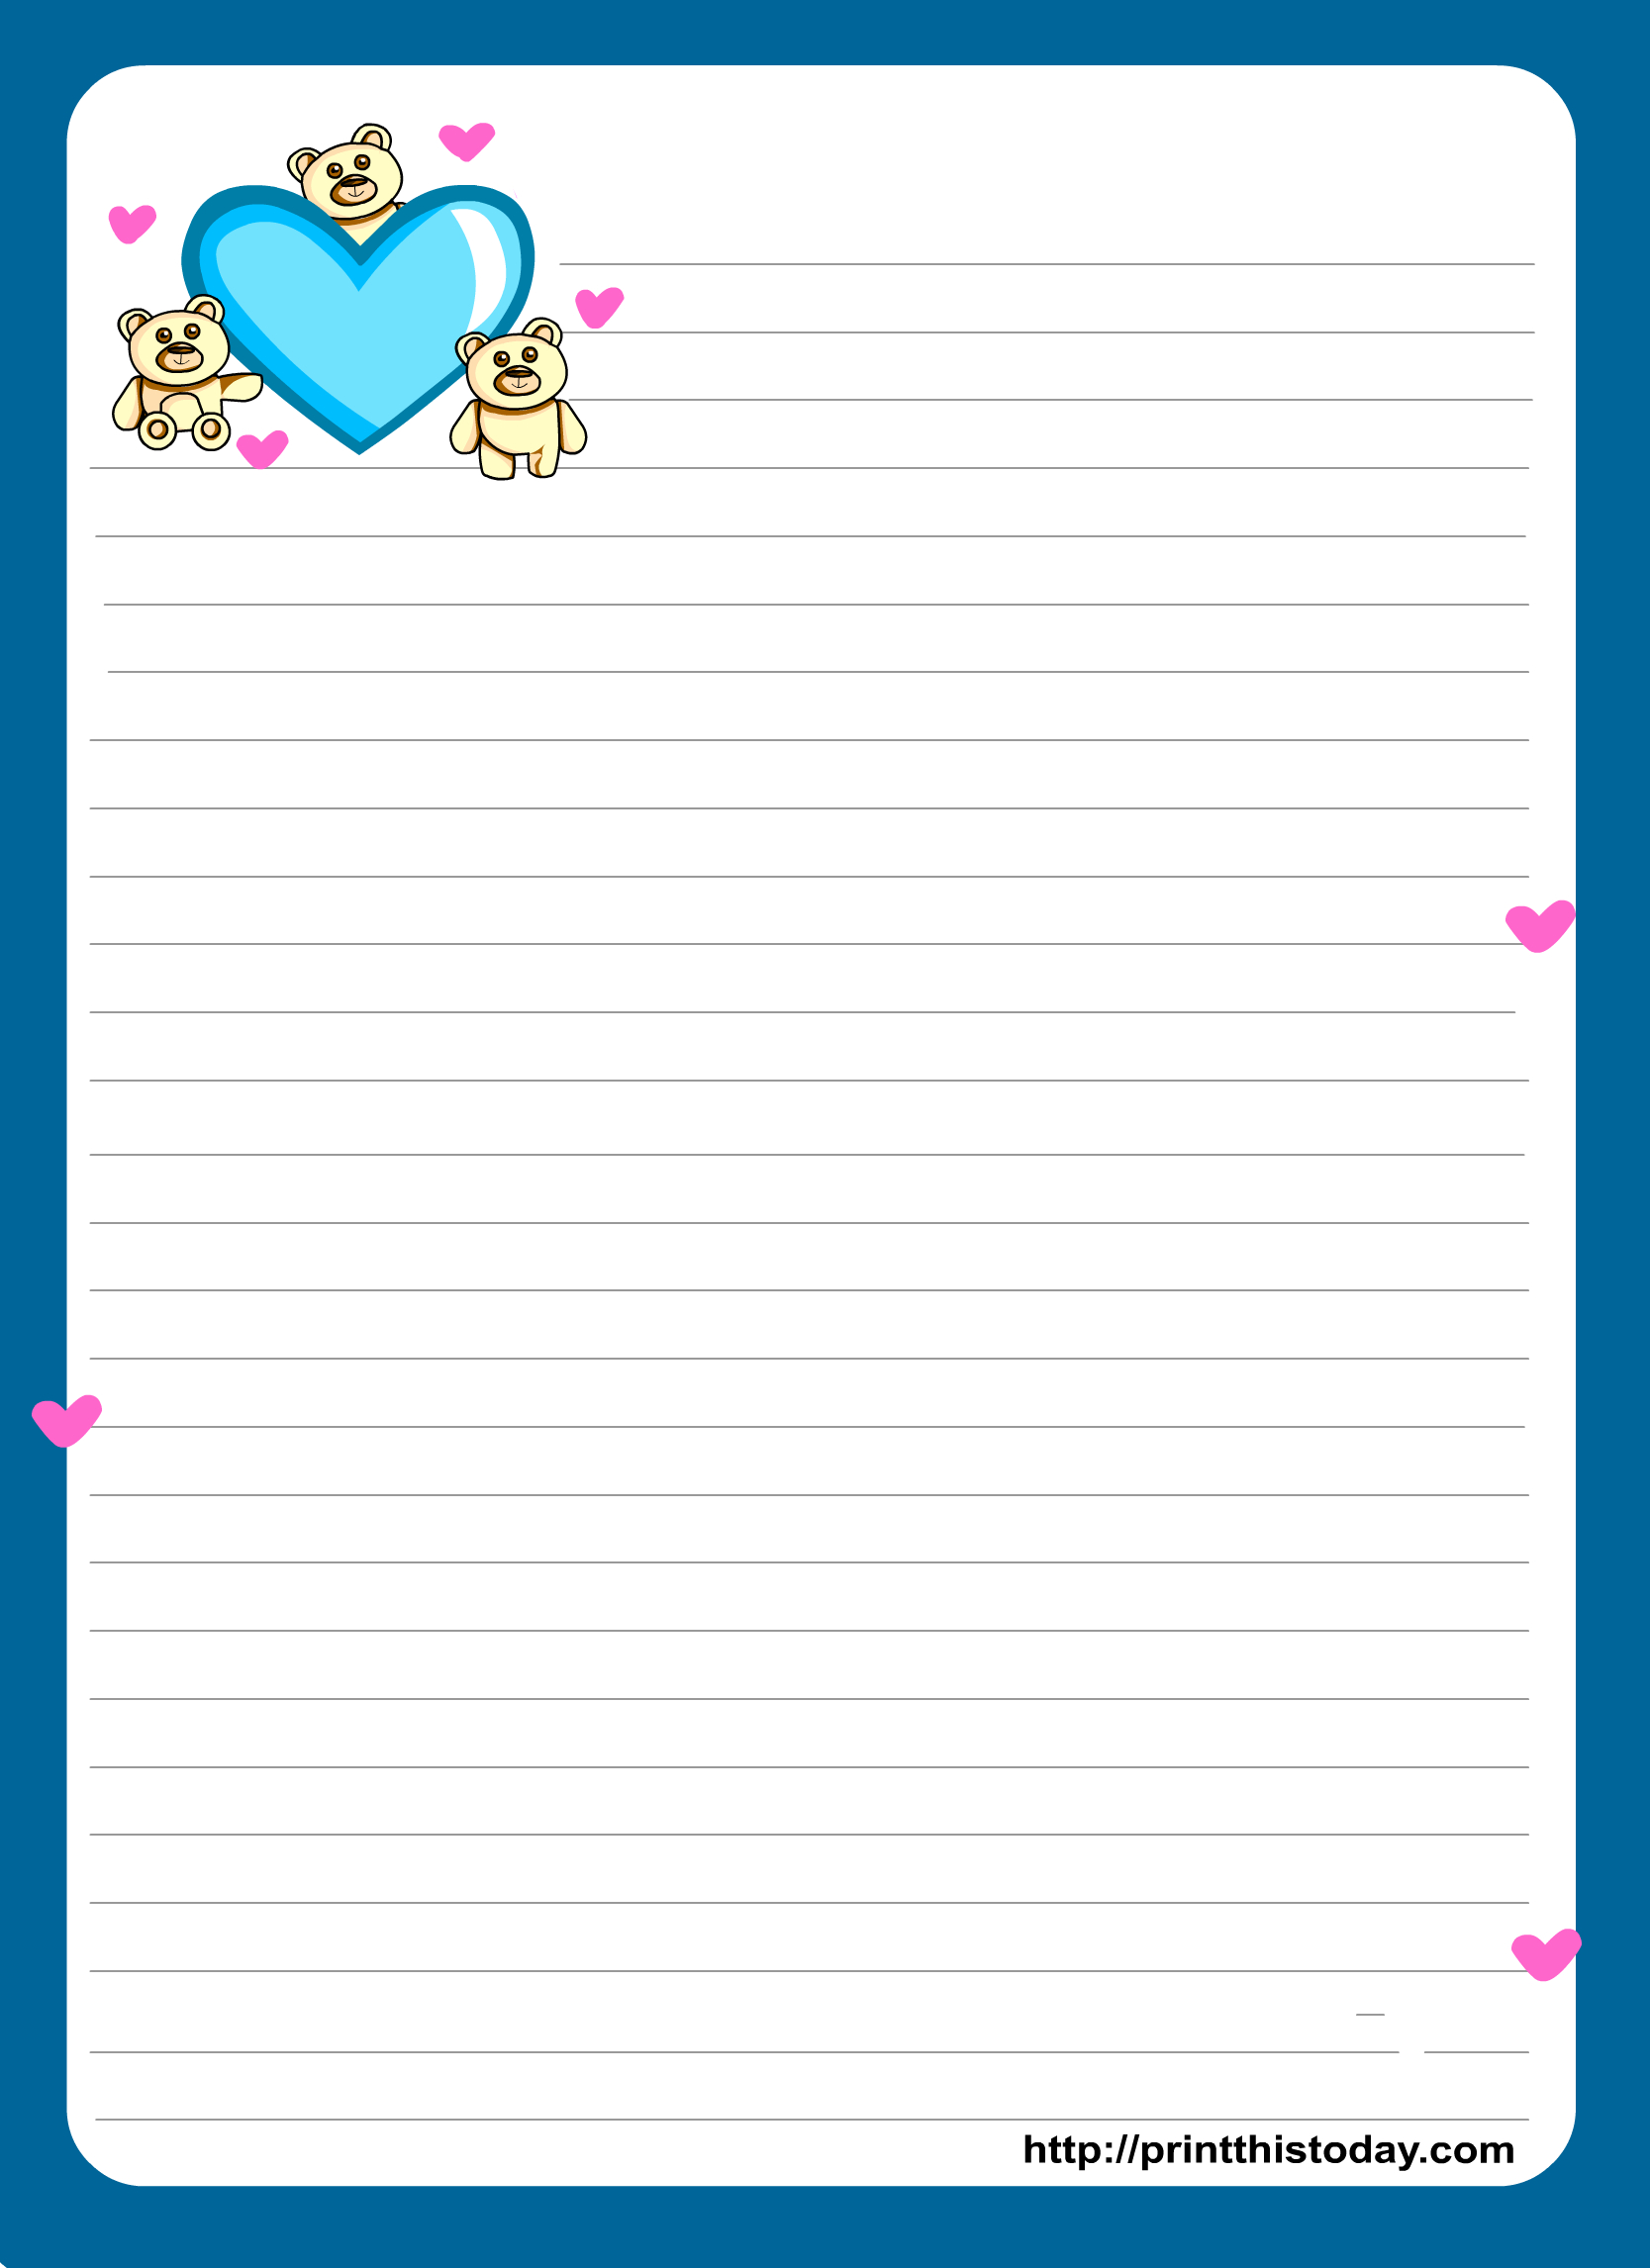 Love Letter Pad Stationery - Free Printable Love Letter Paper